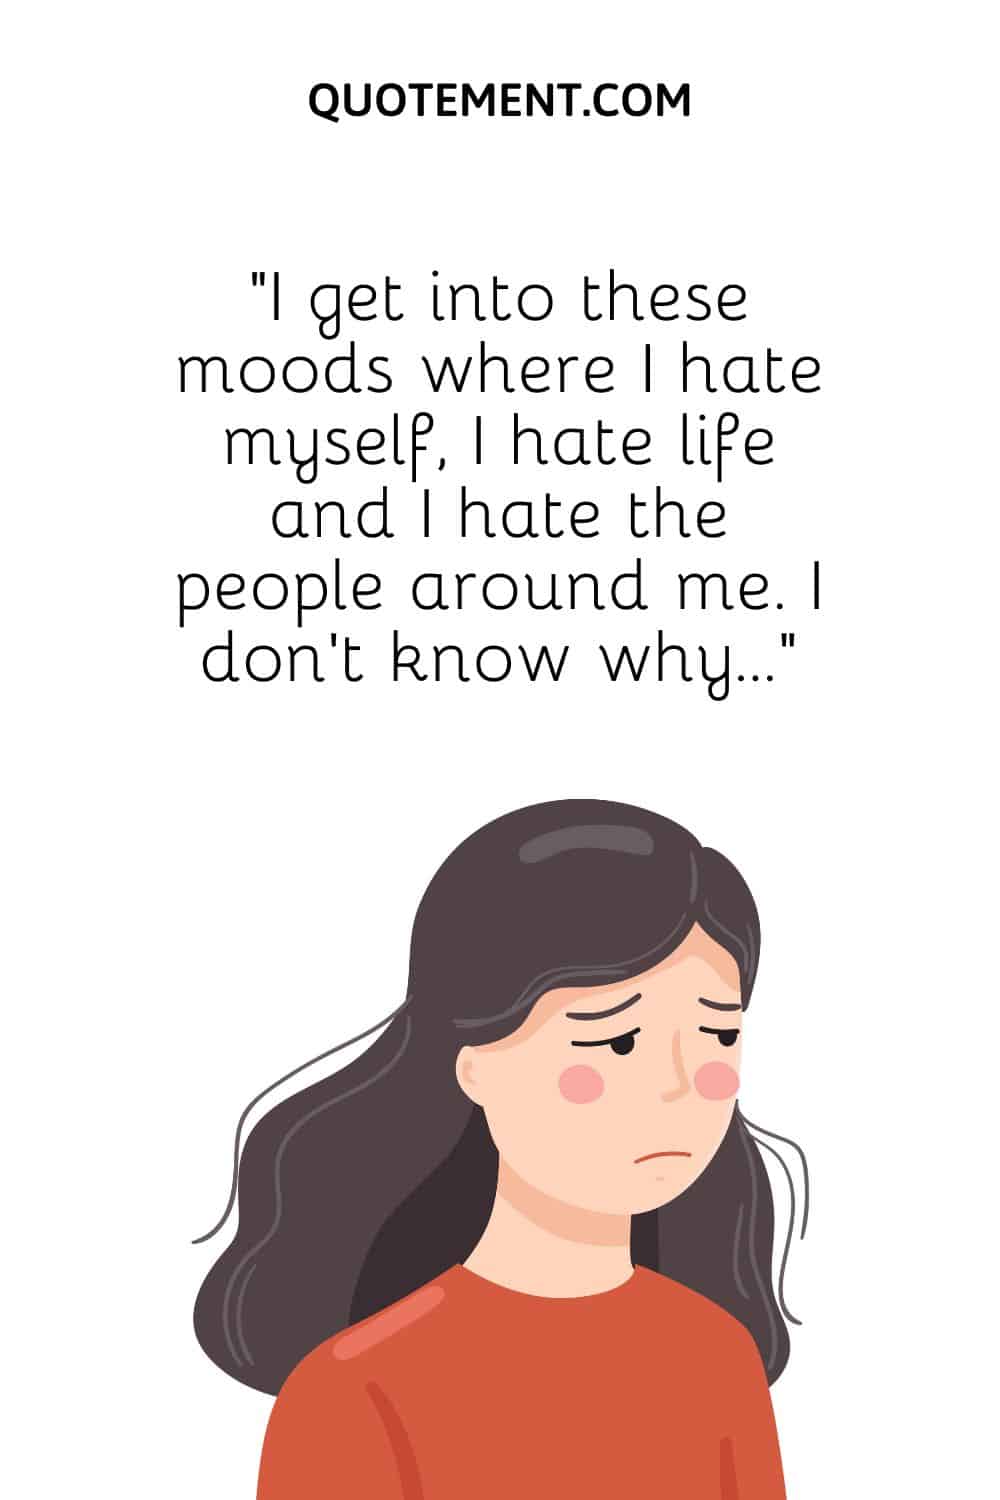 “I get into these moods where I hate myself, I hate life and I hate the people around me. I don’t know why…”